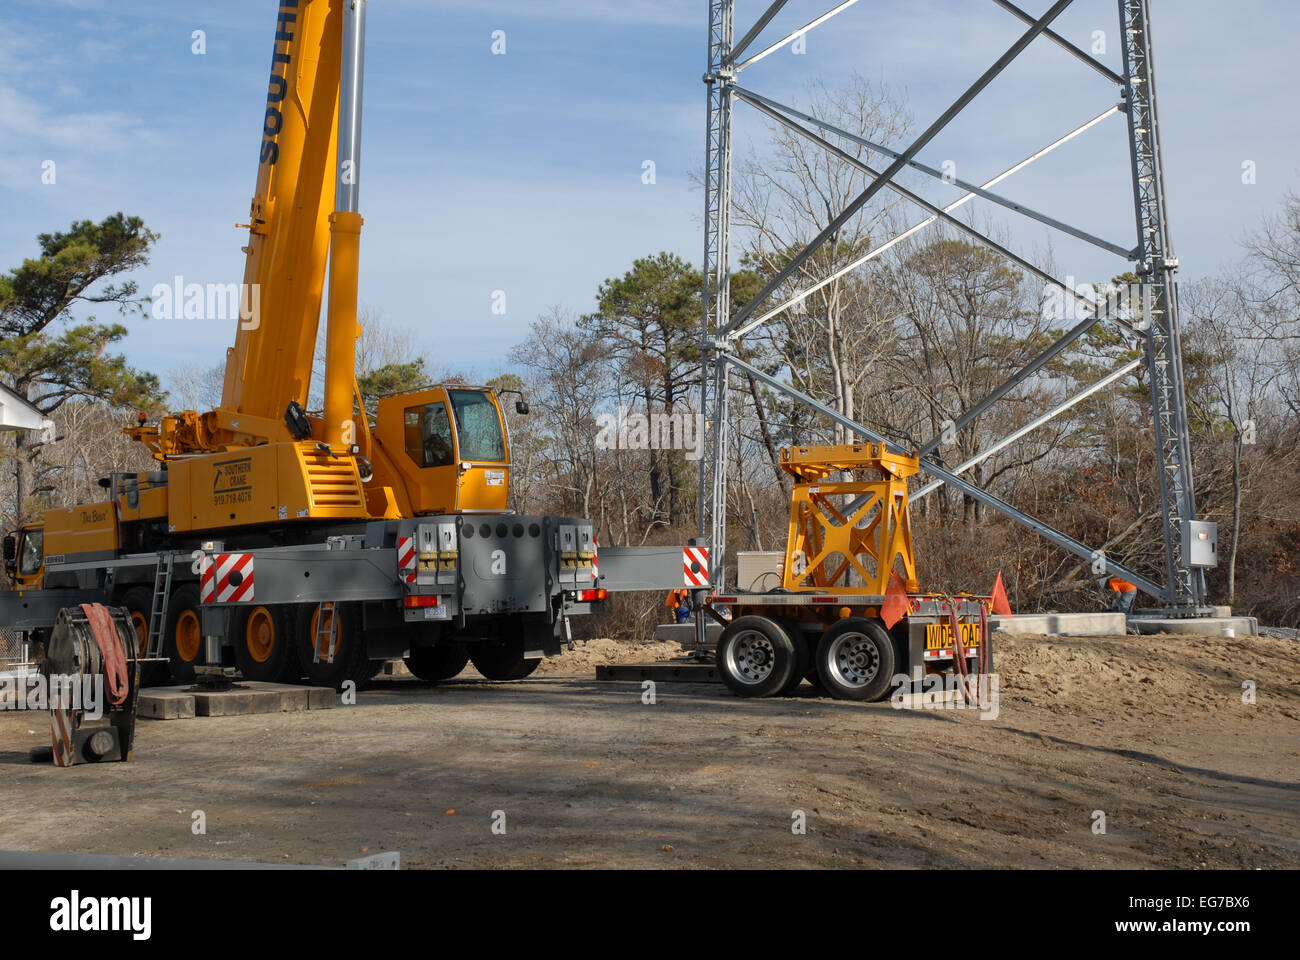 A Crane being used to construct a Cellphone Tower. Stock Photo